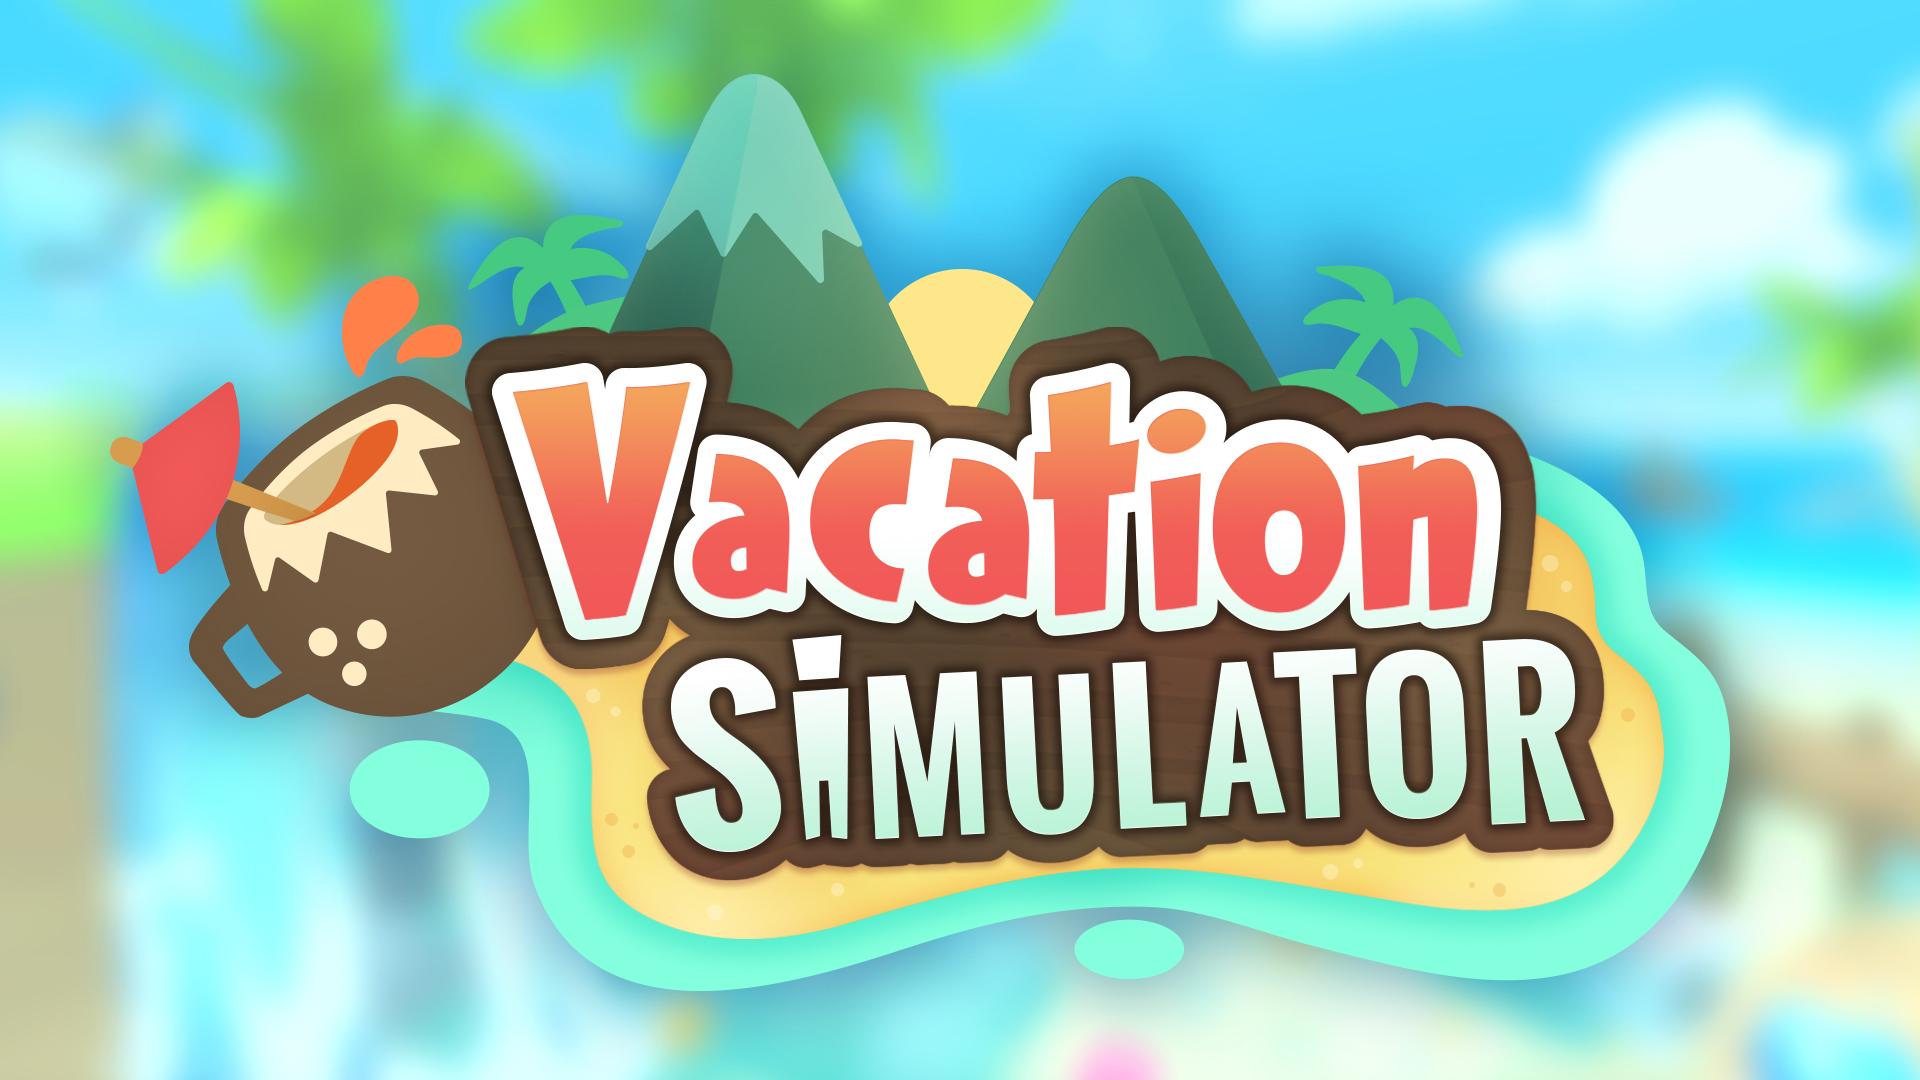 Owlchemy Labs' New VR Game “Vacation Simulator” is Rumoured to be